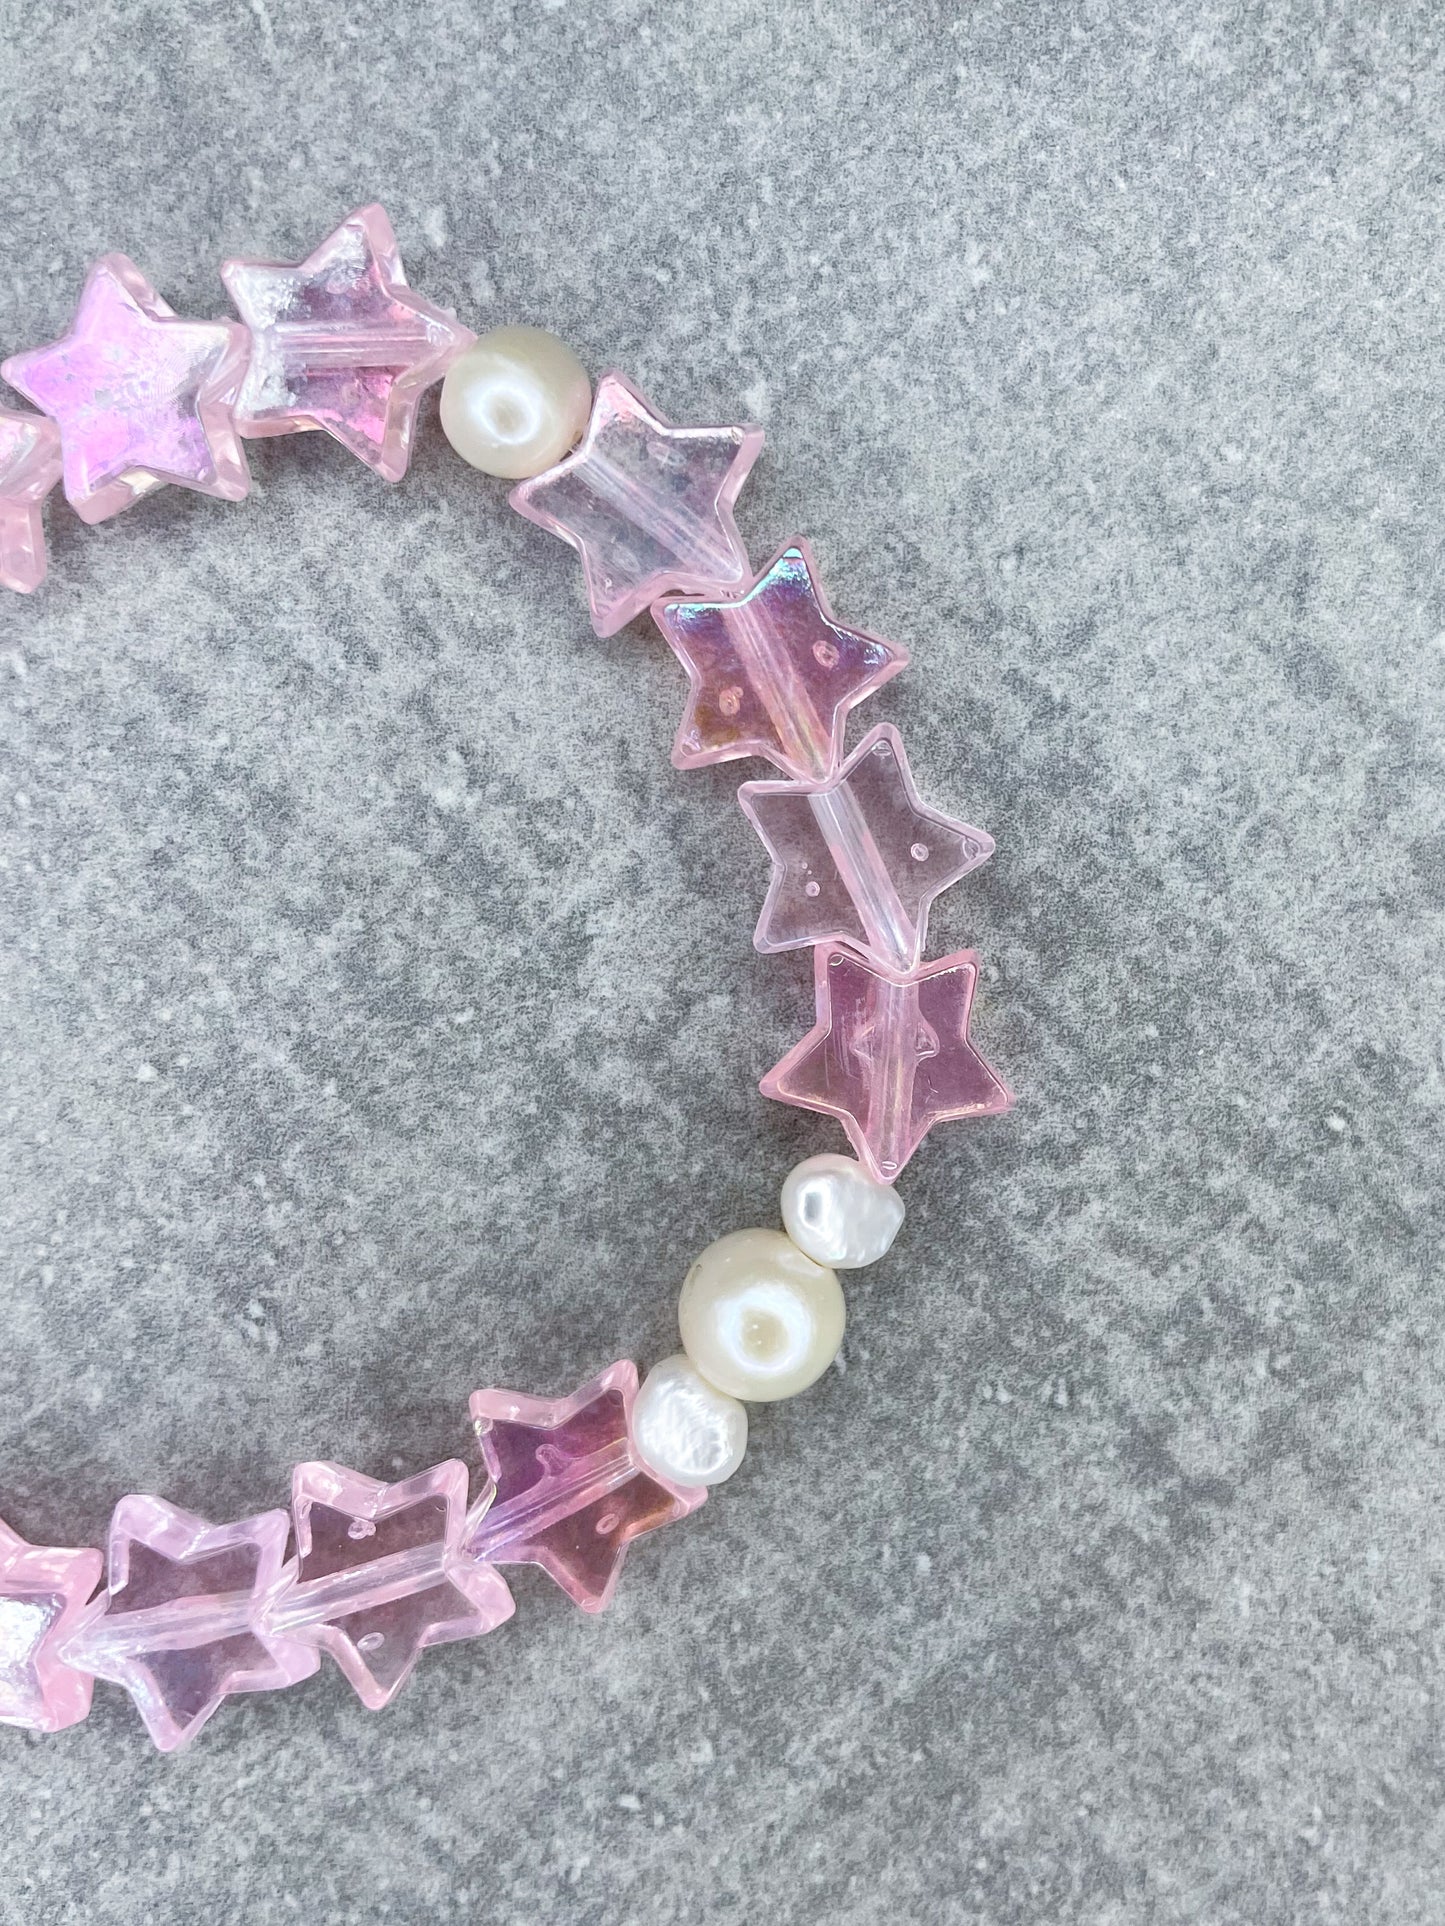 Star and Freshwater Pearl Bracelet "Stars & Pearls"